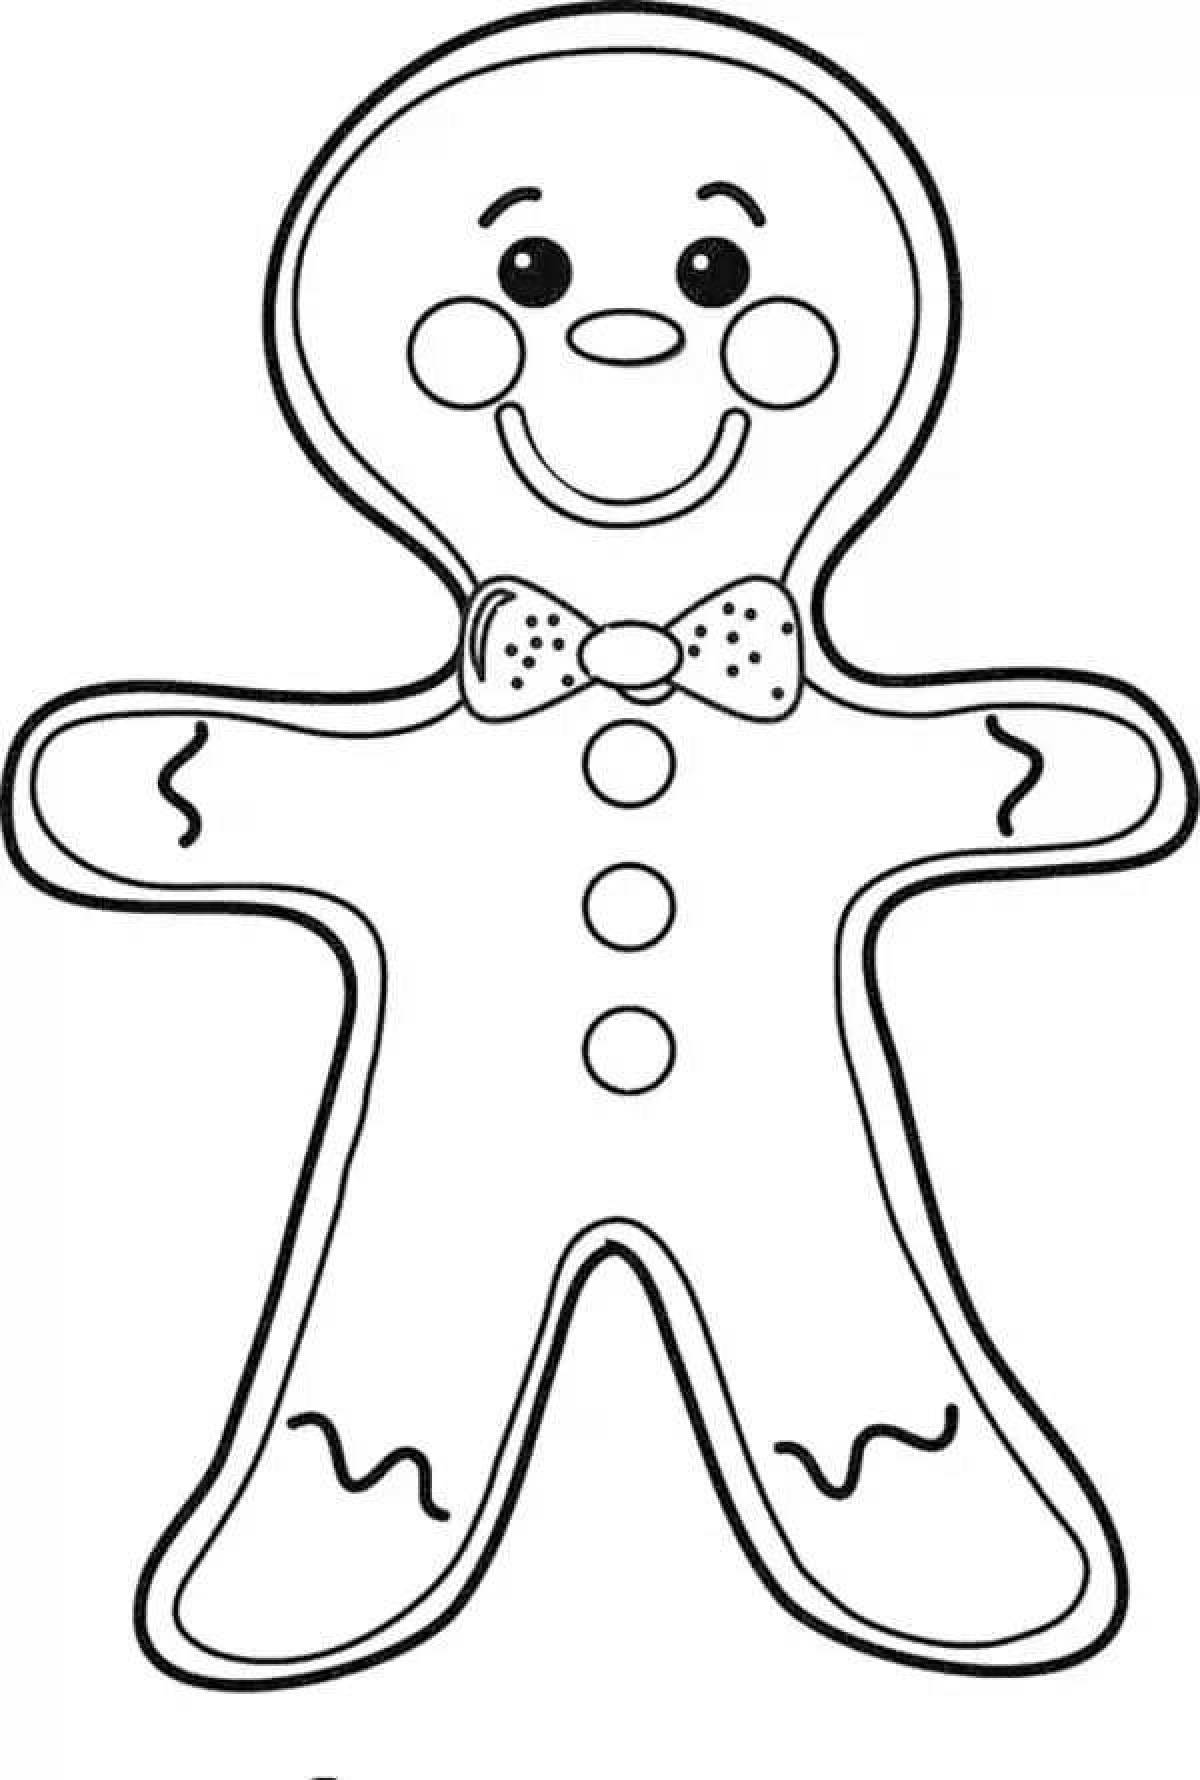 Playful gingerbread coloring for kids